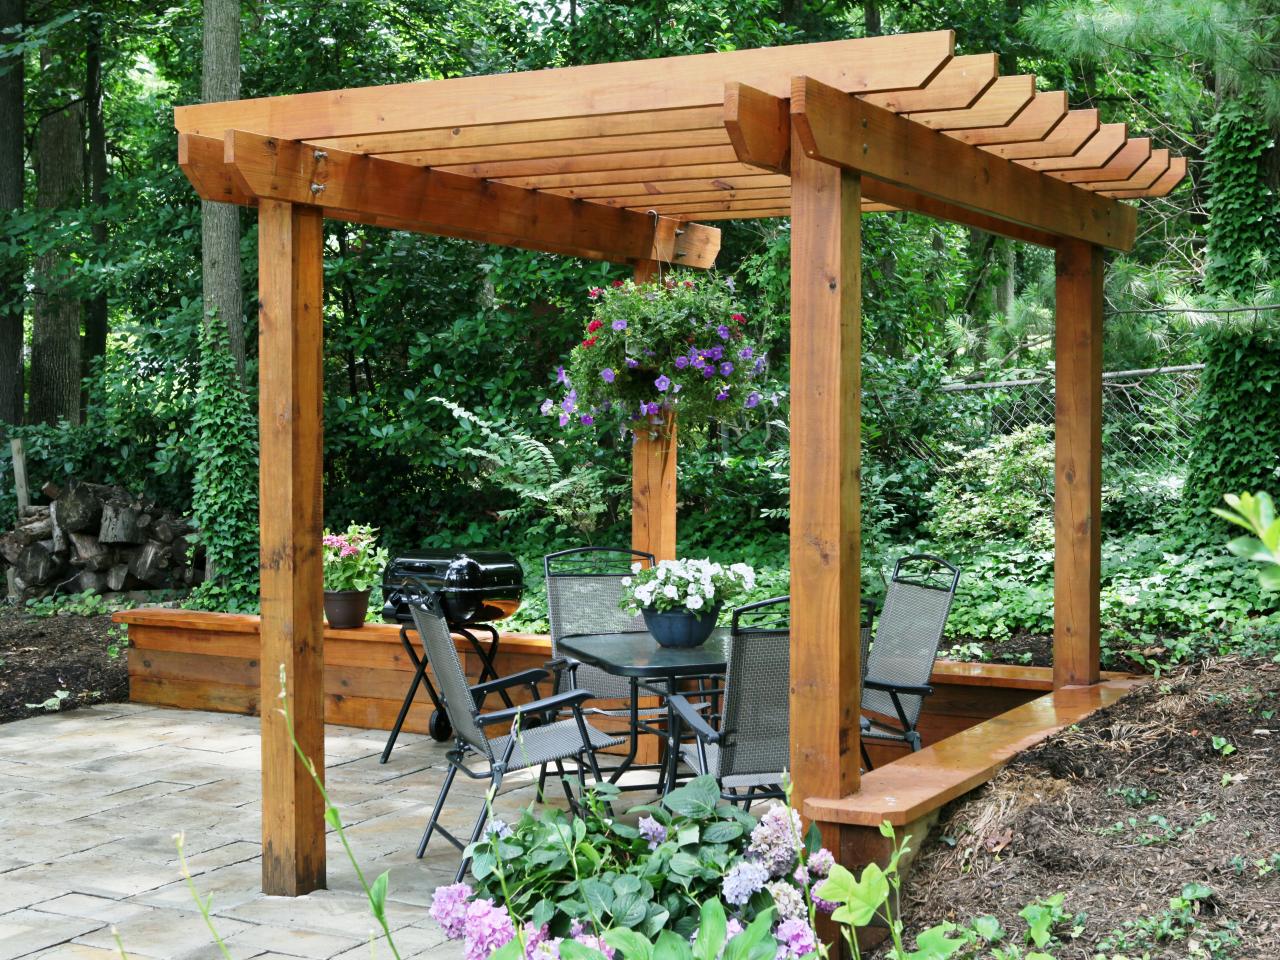 Ultimate-How-To_Pergola-After-Built_s4x3.jpg.rend.hgtvcom.1280.960